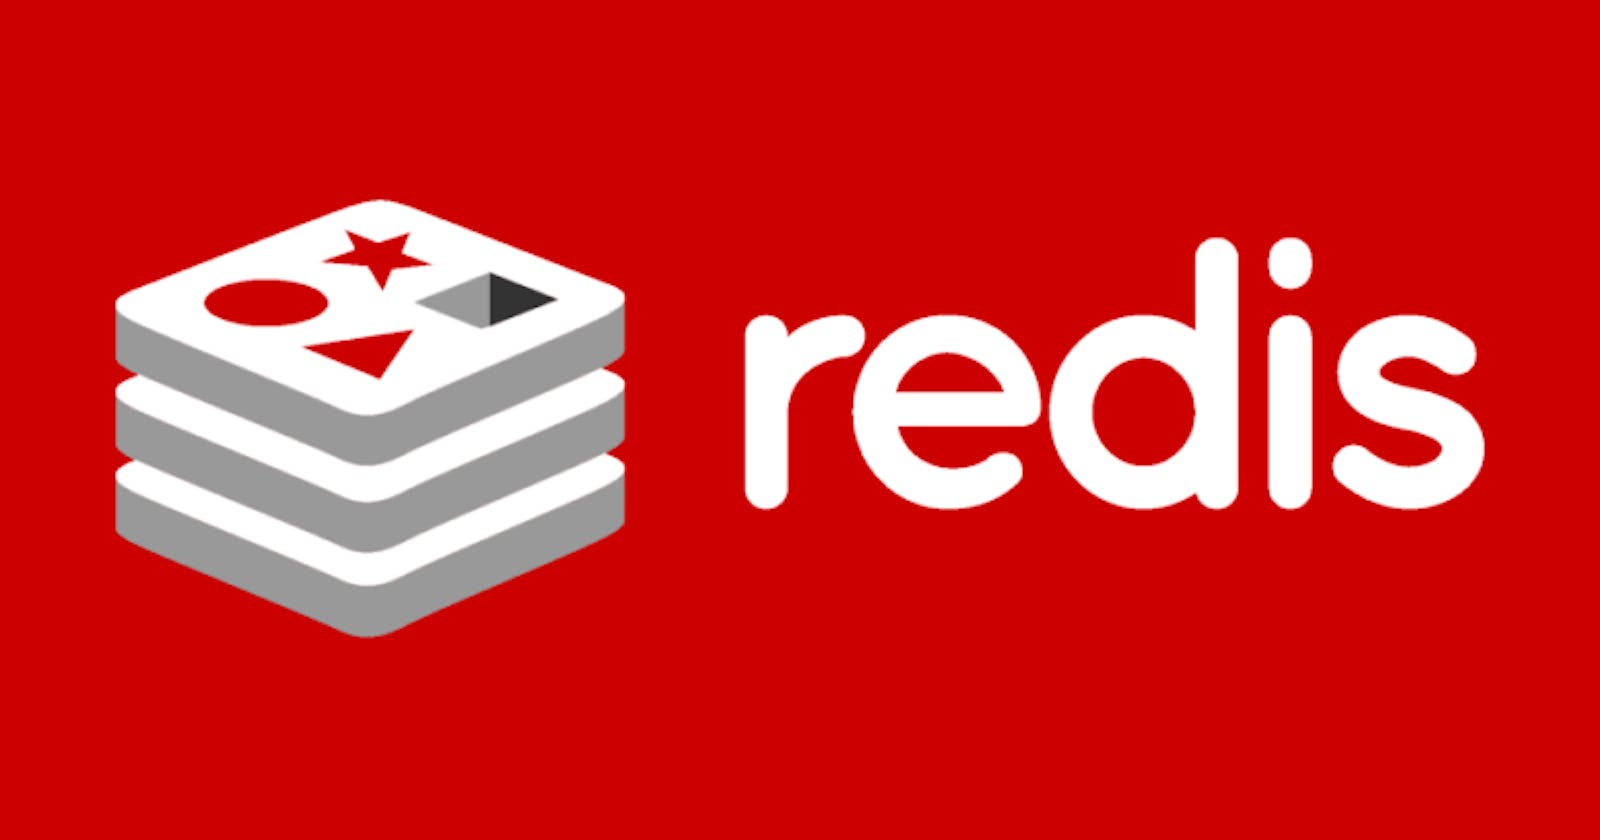 What is Redis and Why?